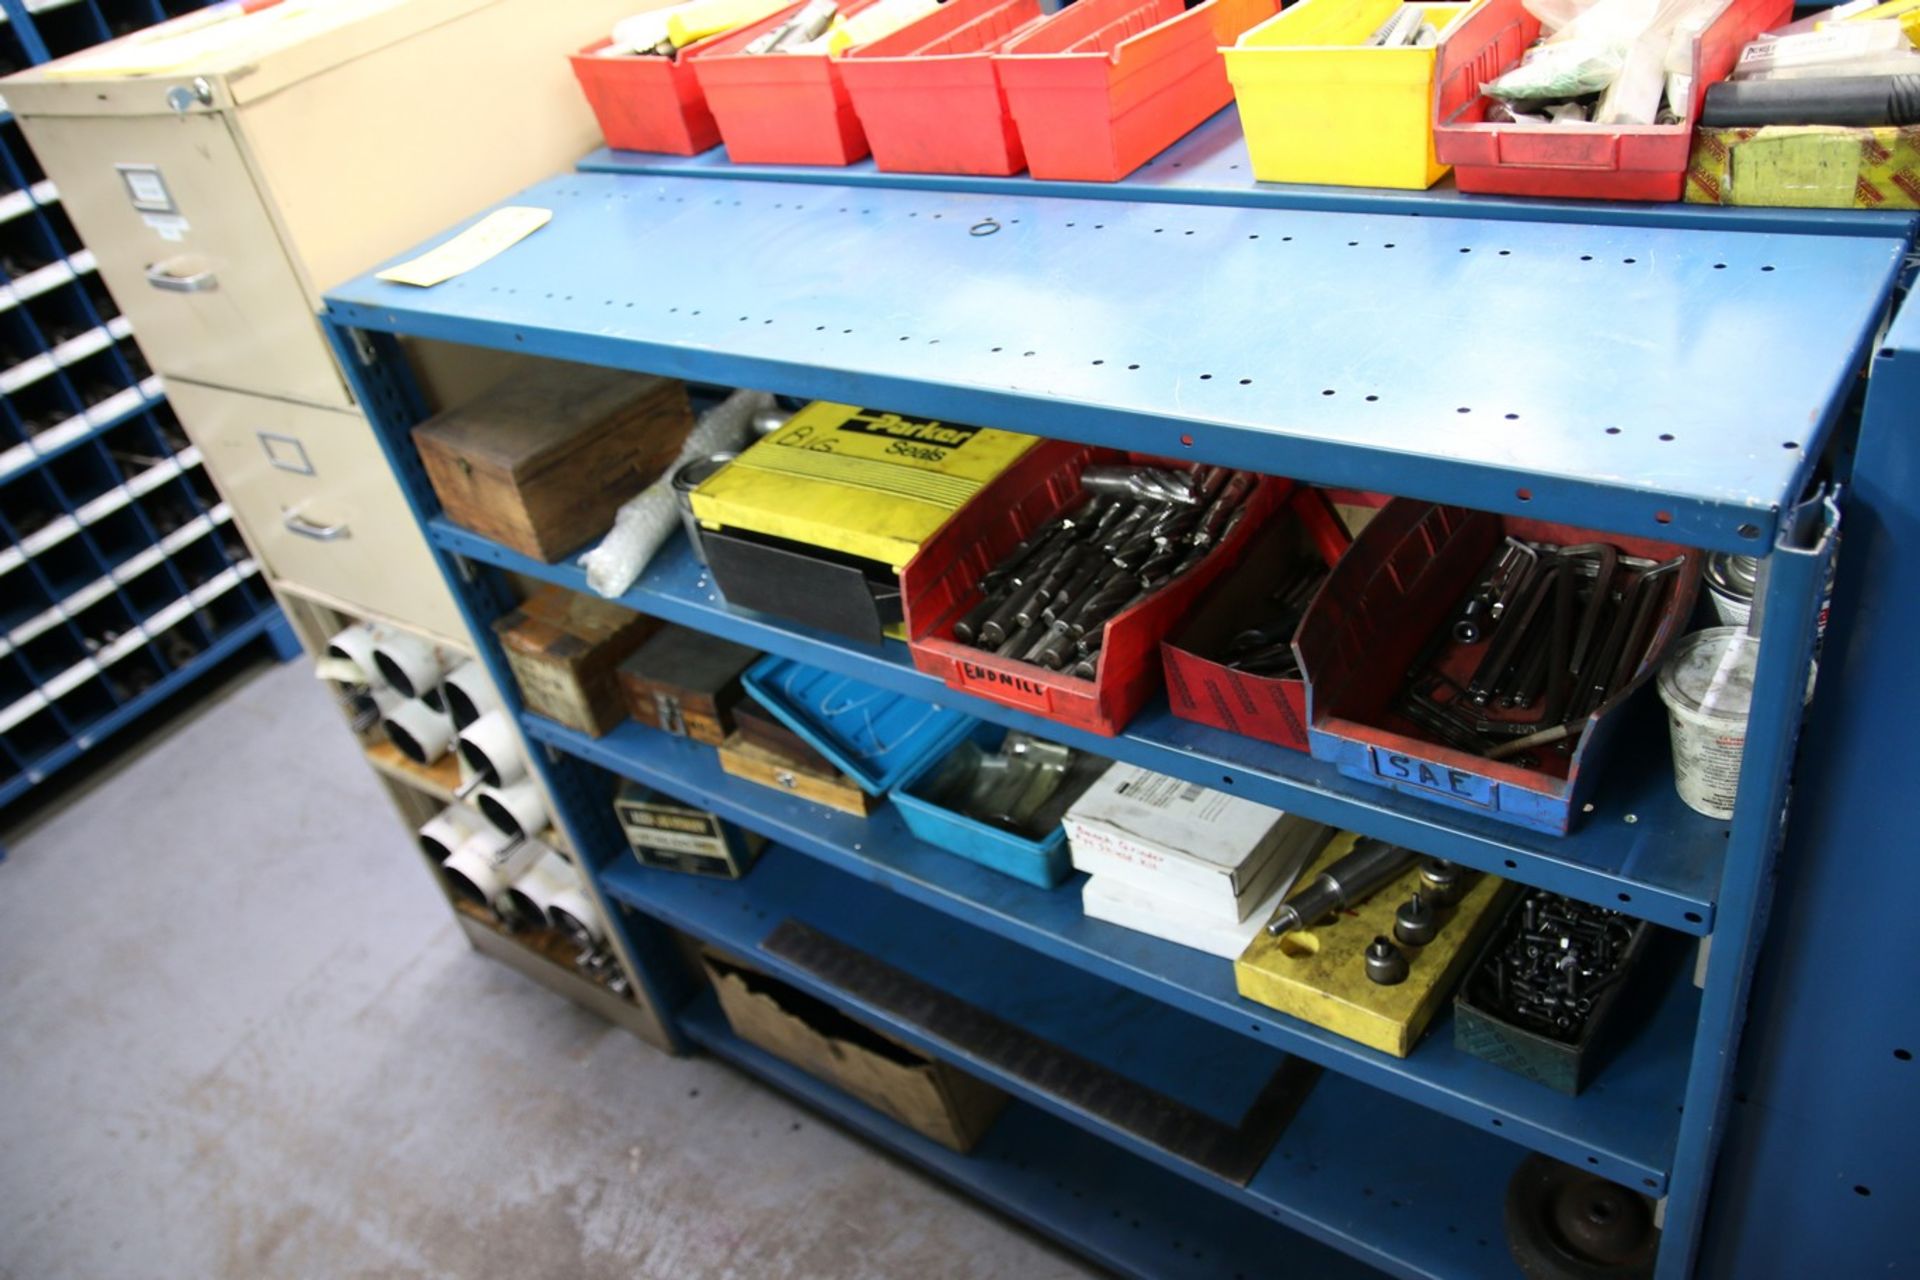 Steel Shelf and Cabinet with Contents (1) Shelf and (1) Filling Cabinet, Contents Include Drills,